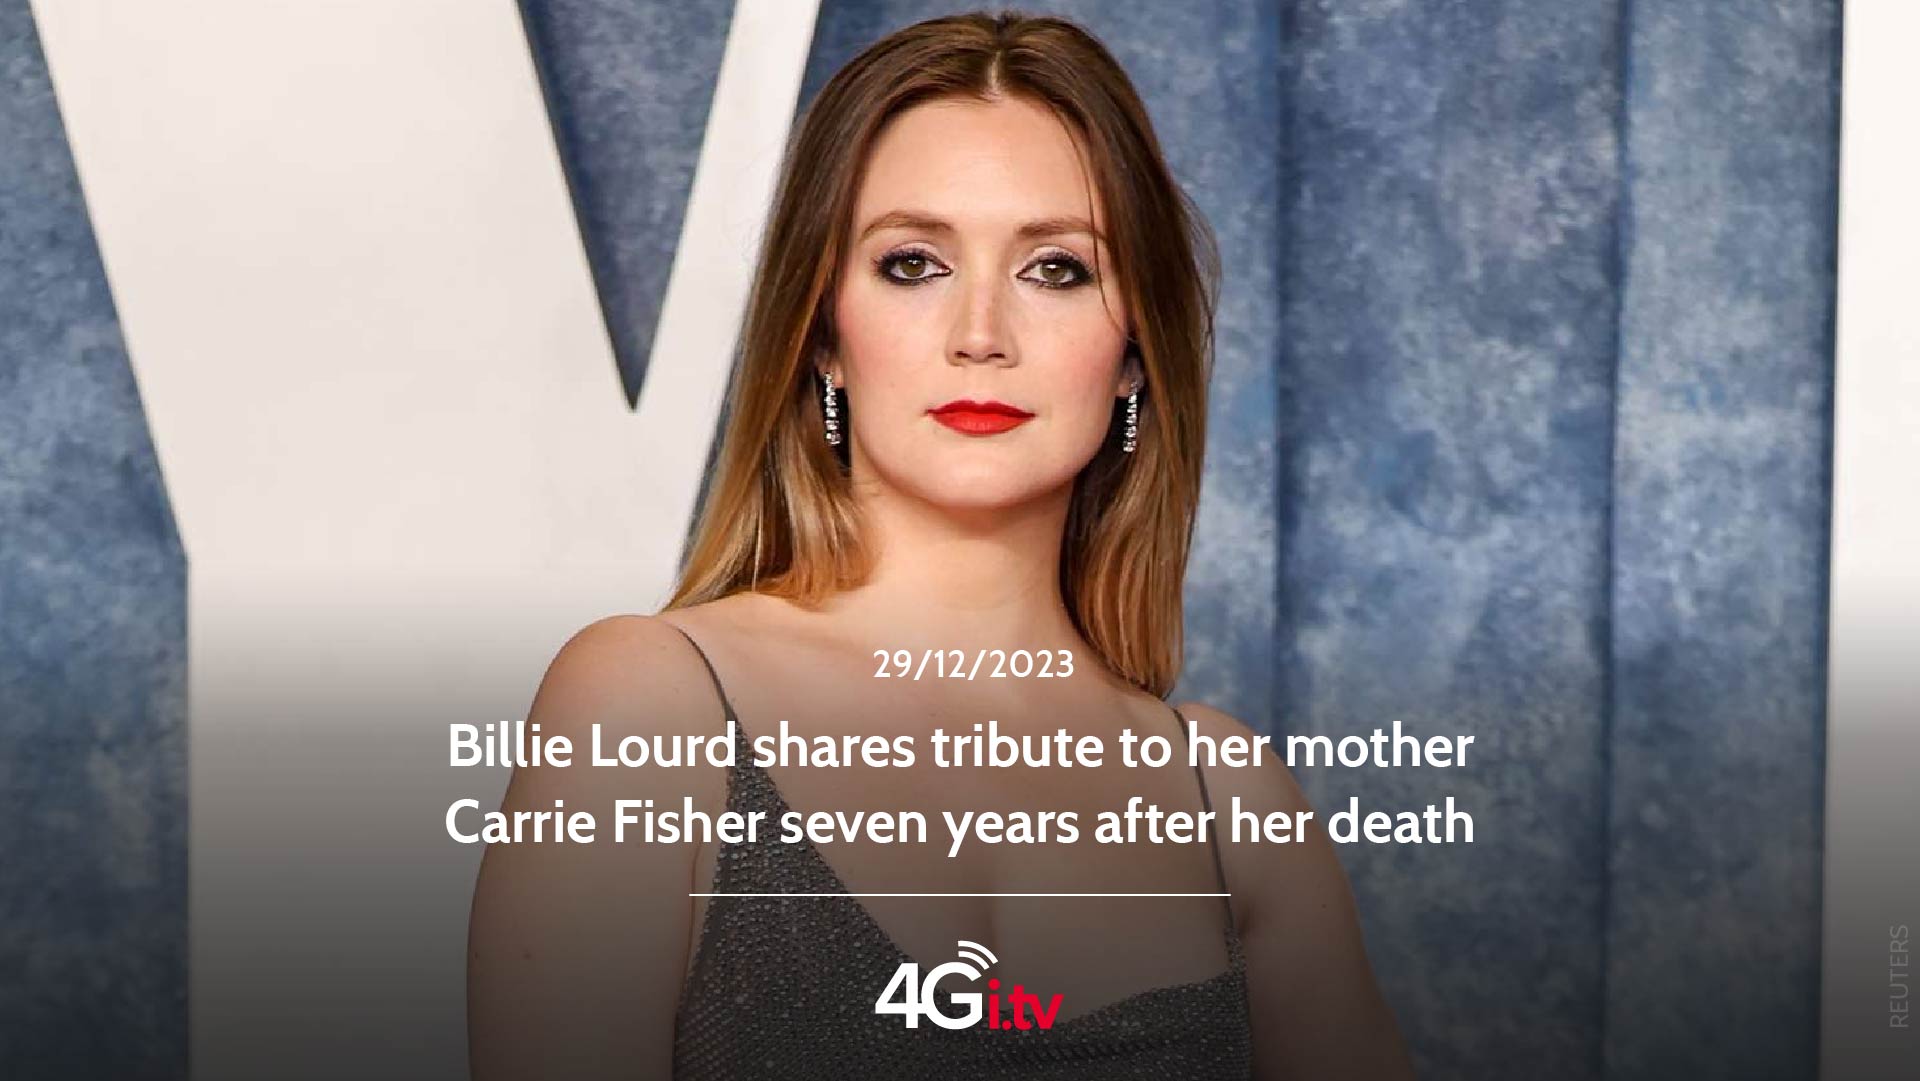 Подробнее о статье Billie Lourd shares tribute to her mother Carrie Fisher seven years after her death